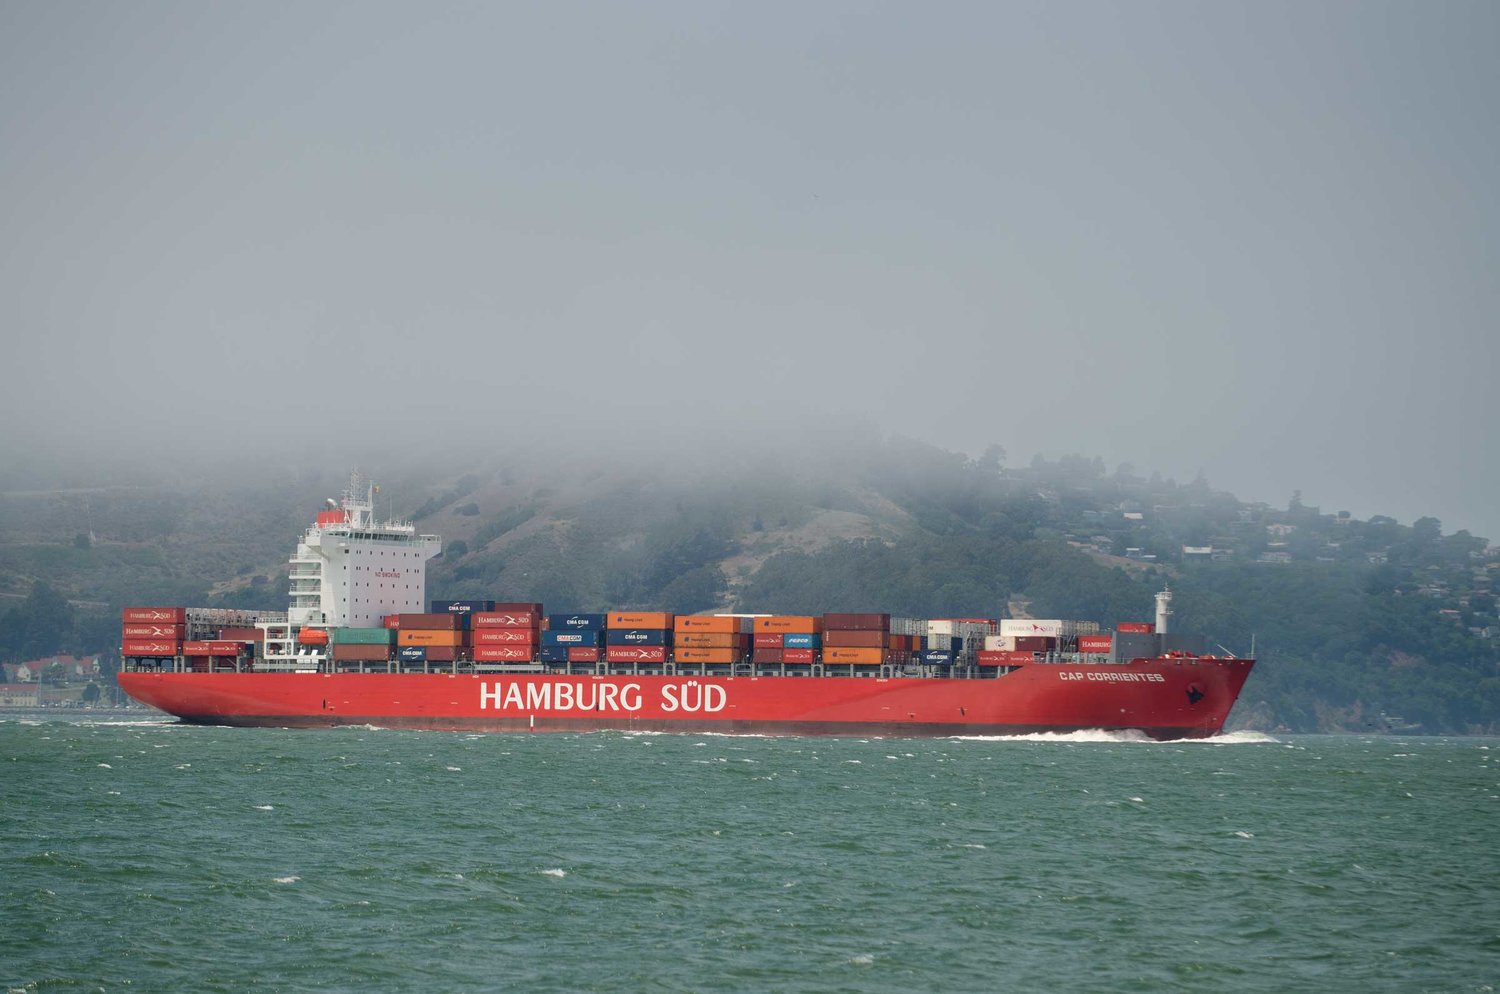 Panamax containership Cap Jackson disabled due to fire